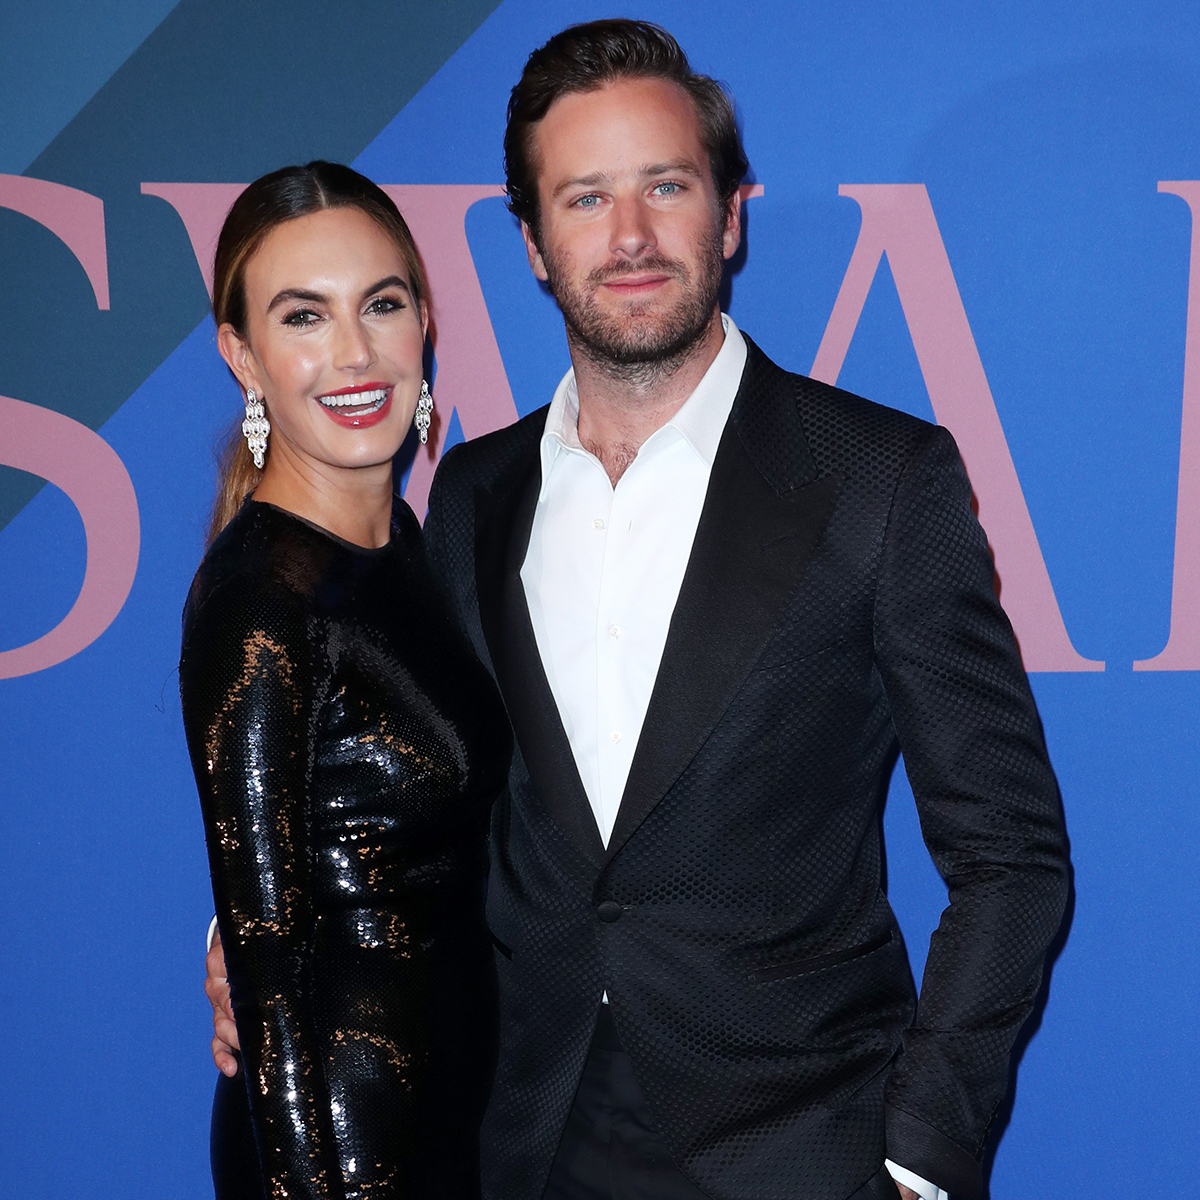 Elizabeth Chambers “found evidence” of Armie Hammer’s case with Costar